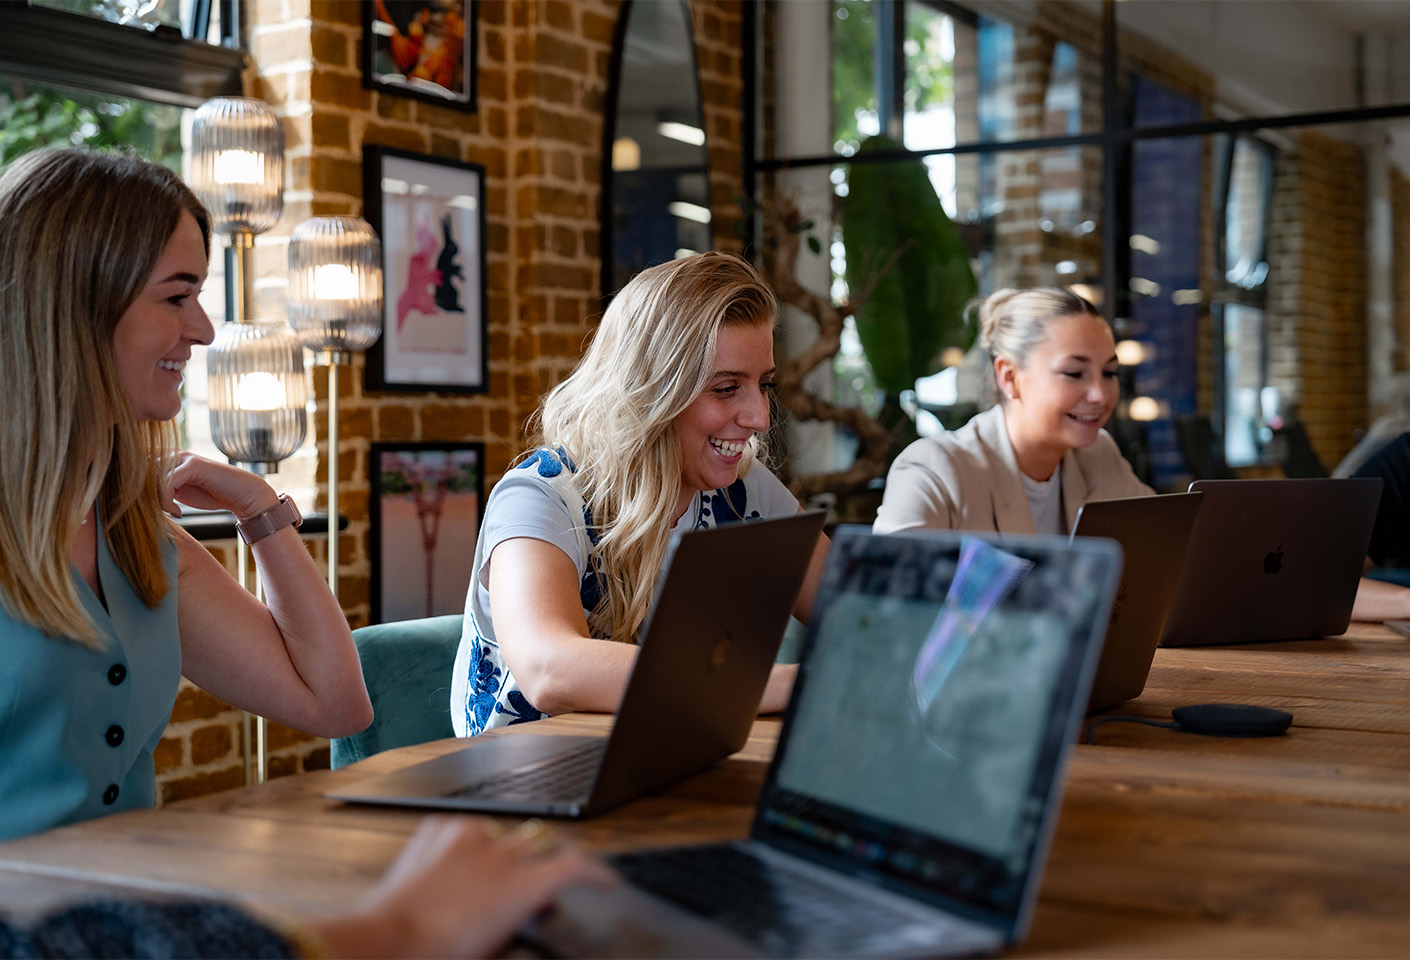 Image of three woman on laptops, smiling during a business meeting